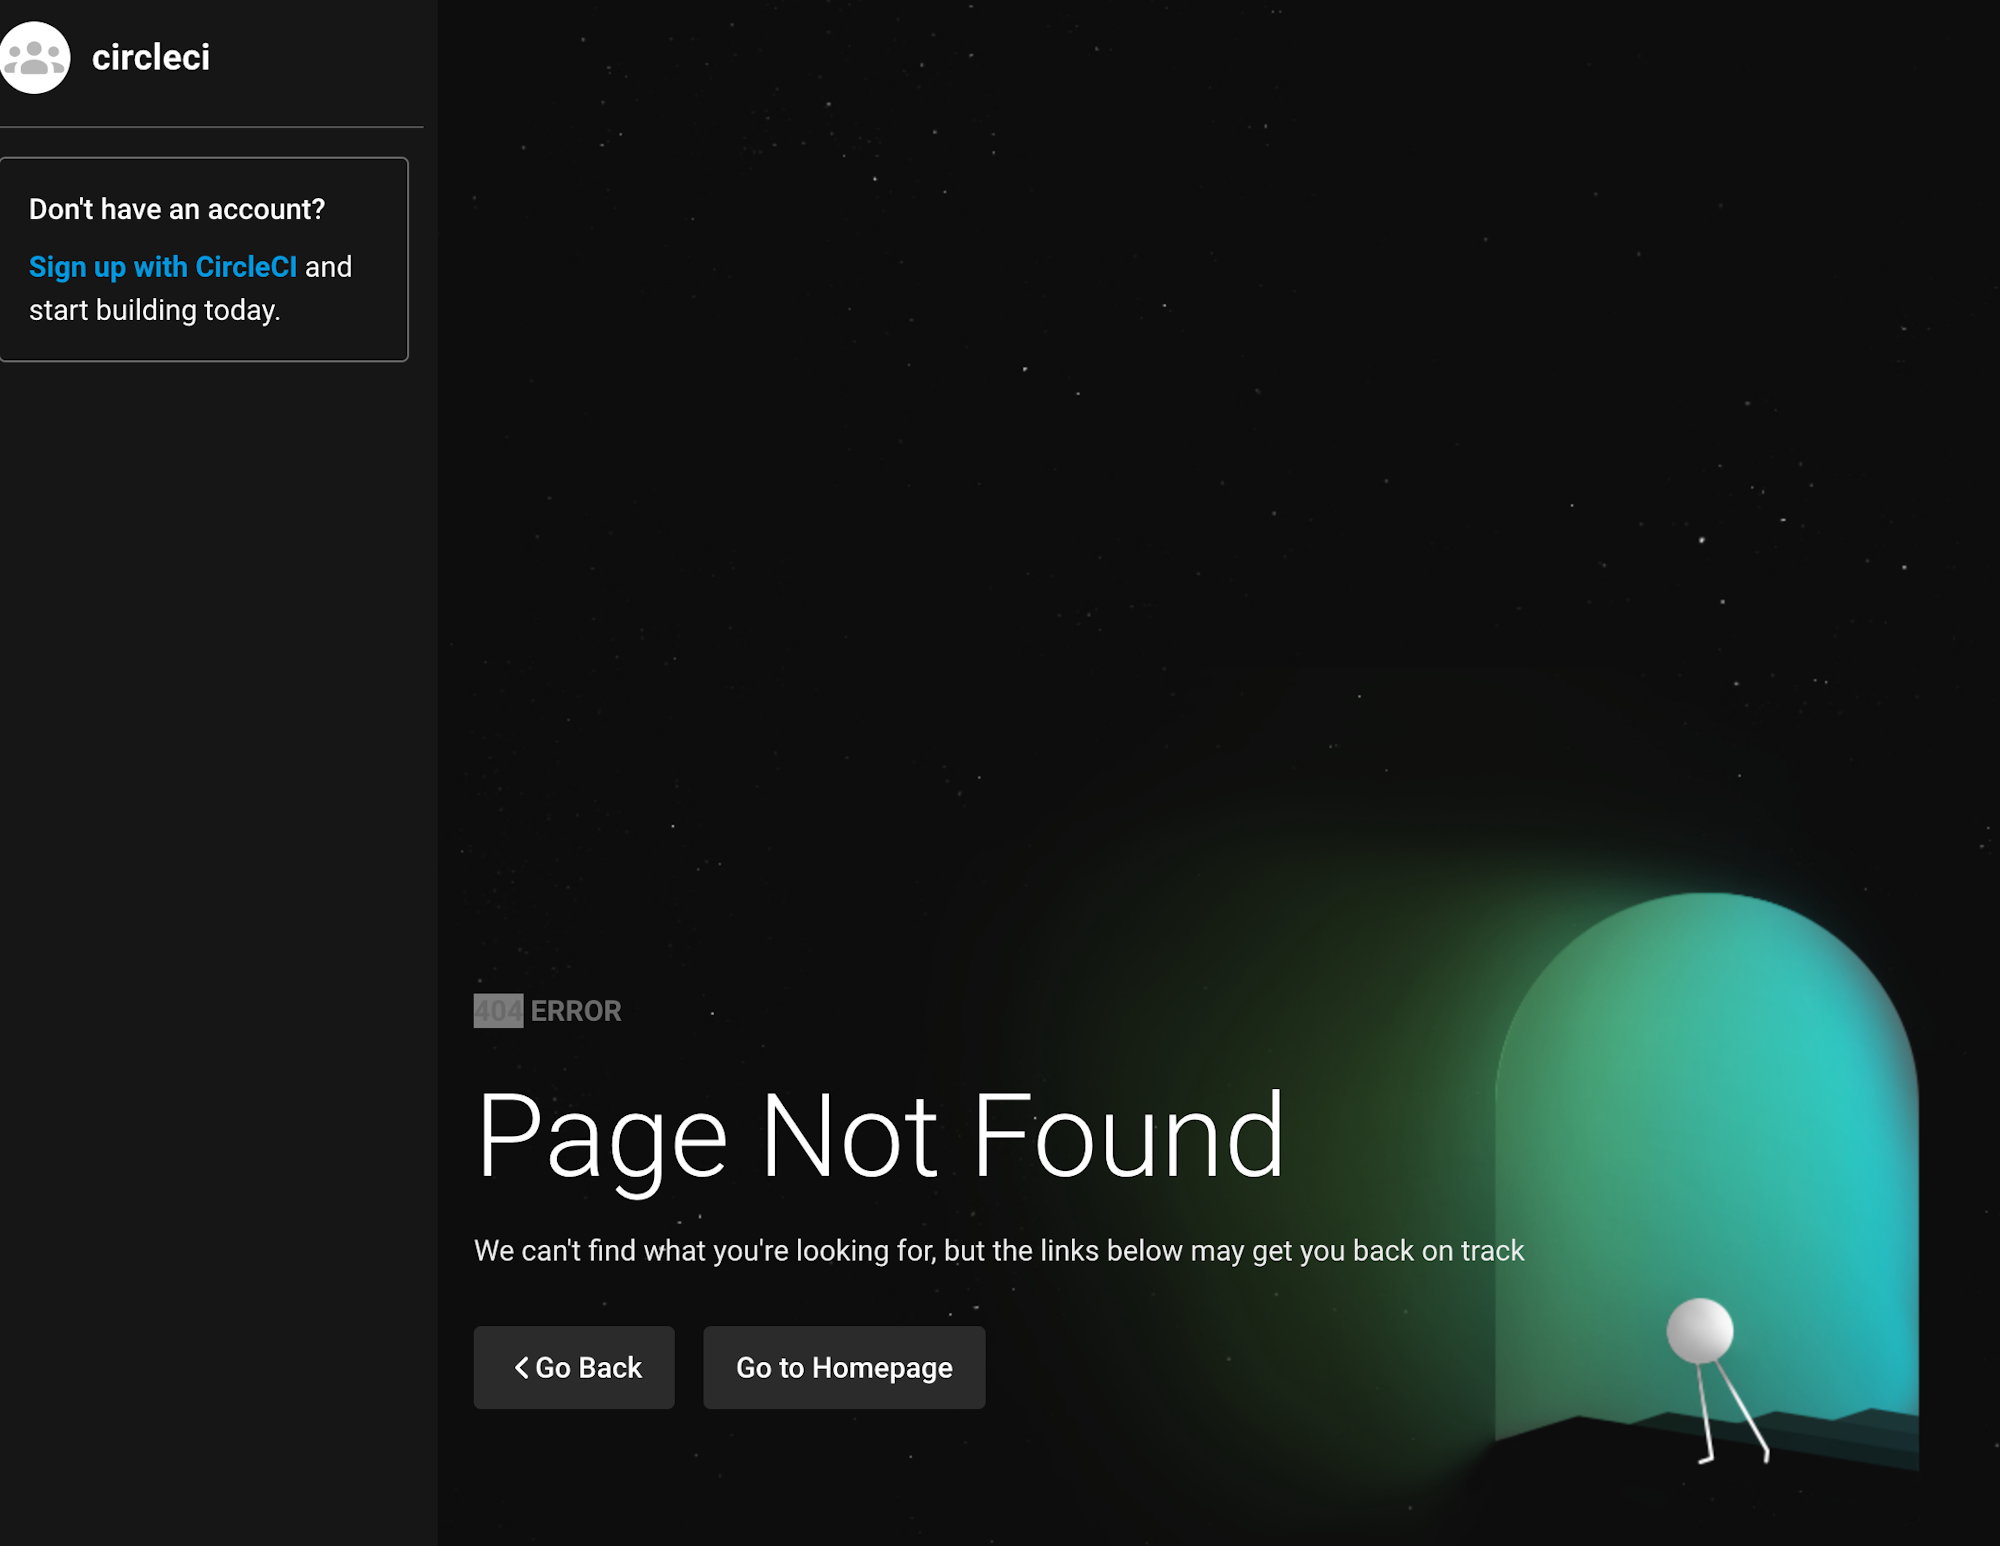 Screenshot of the 404 error displayed to unauthenticated or unauthorized users